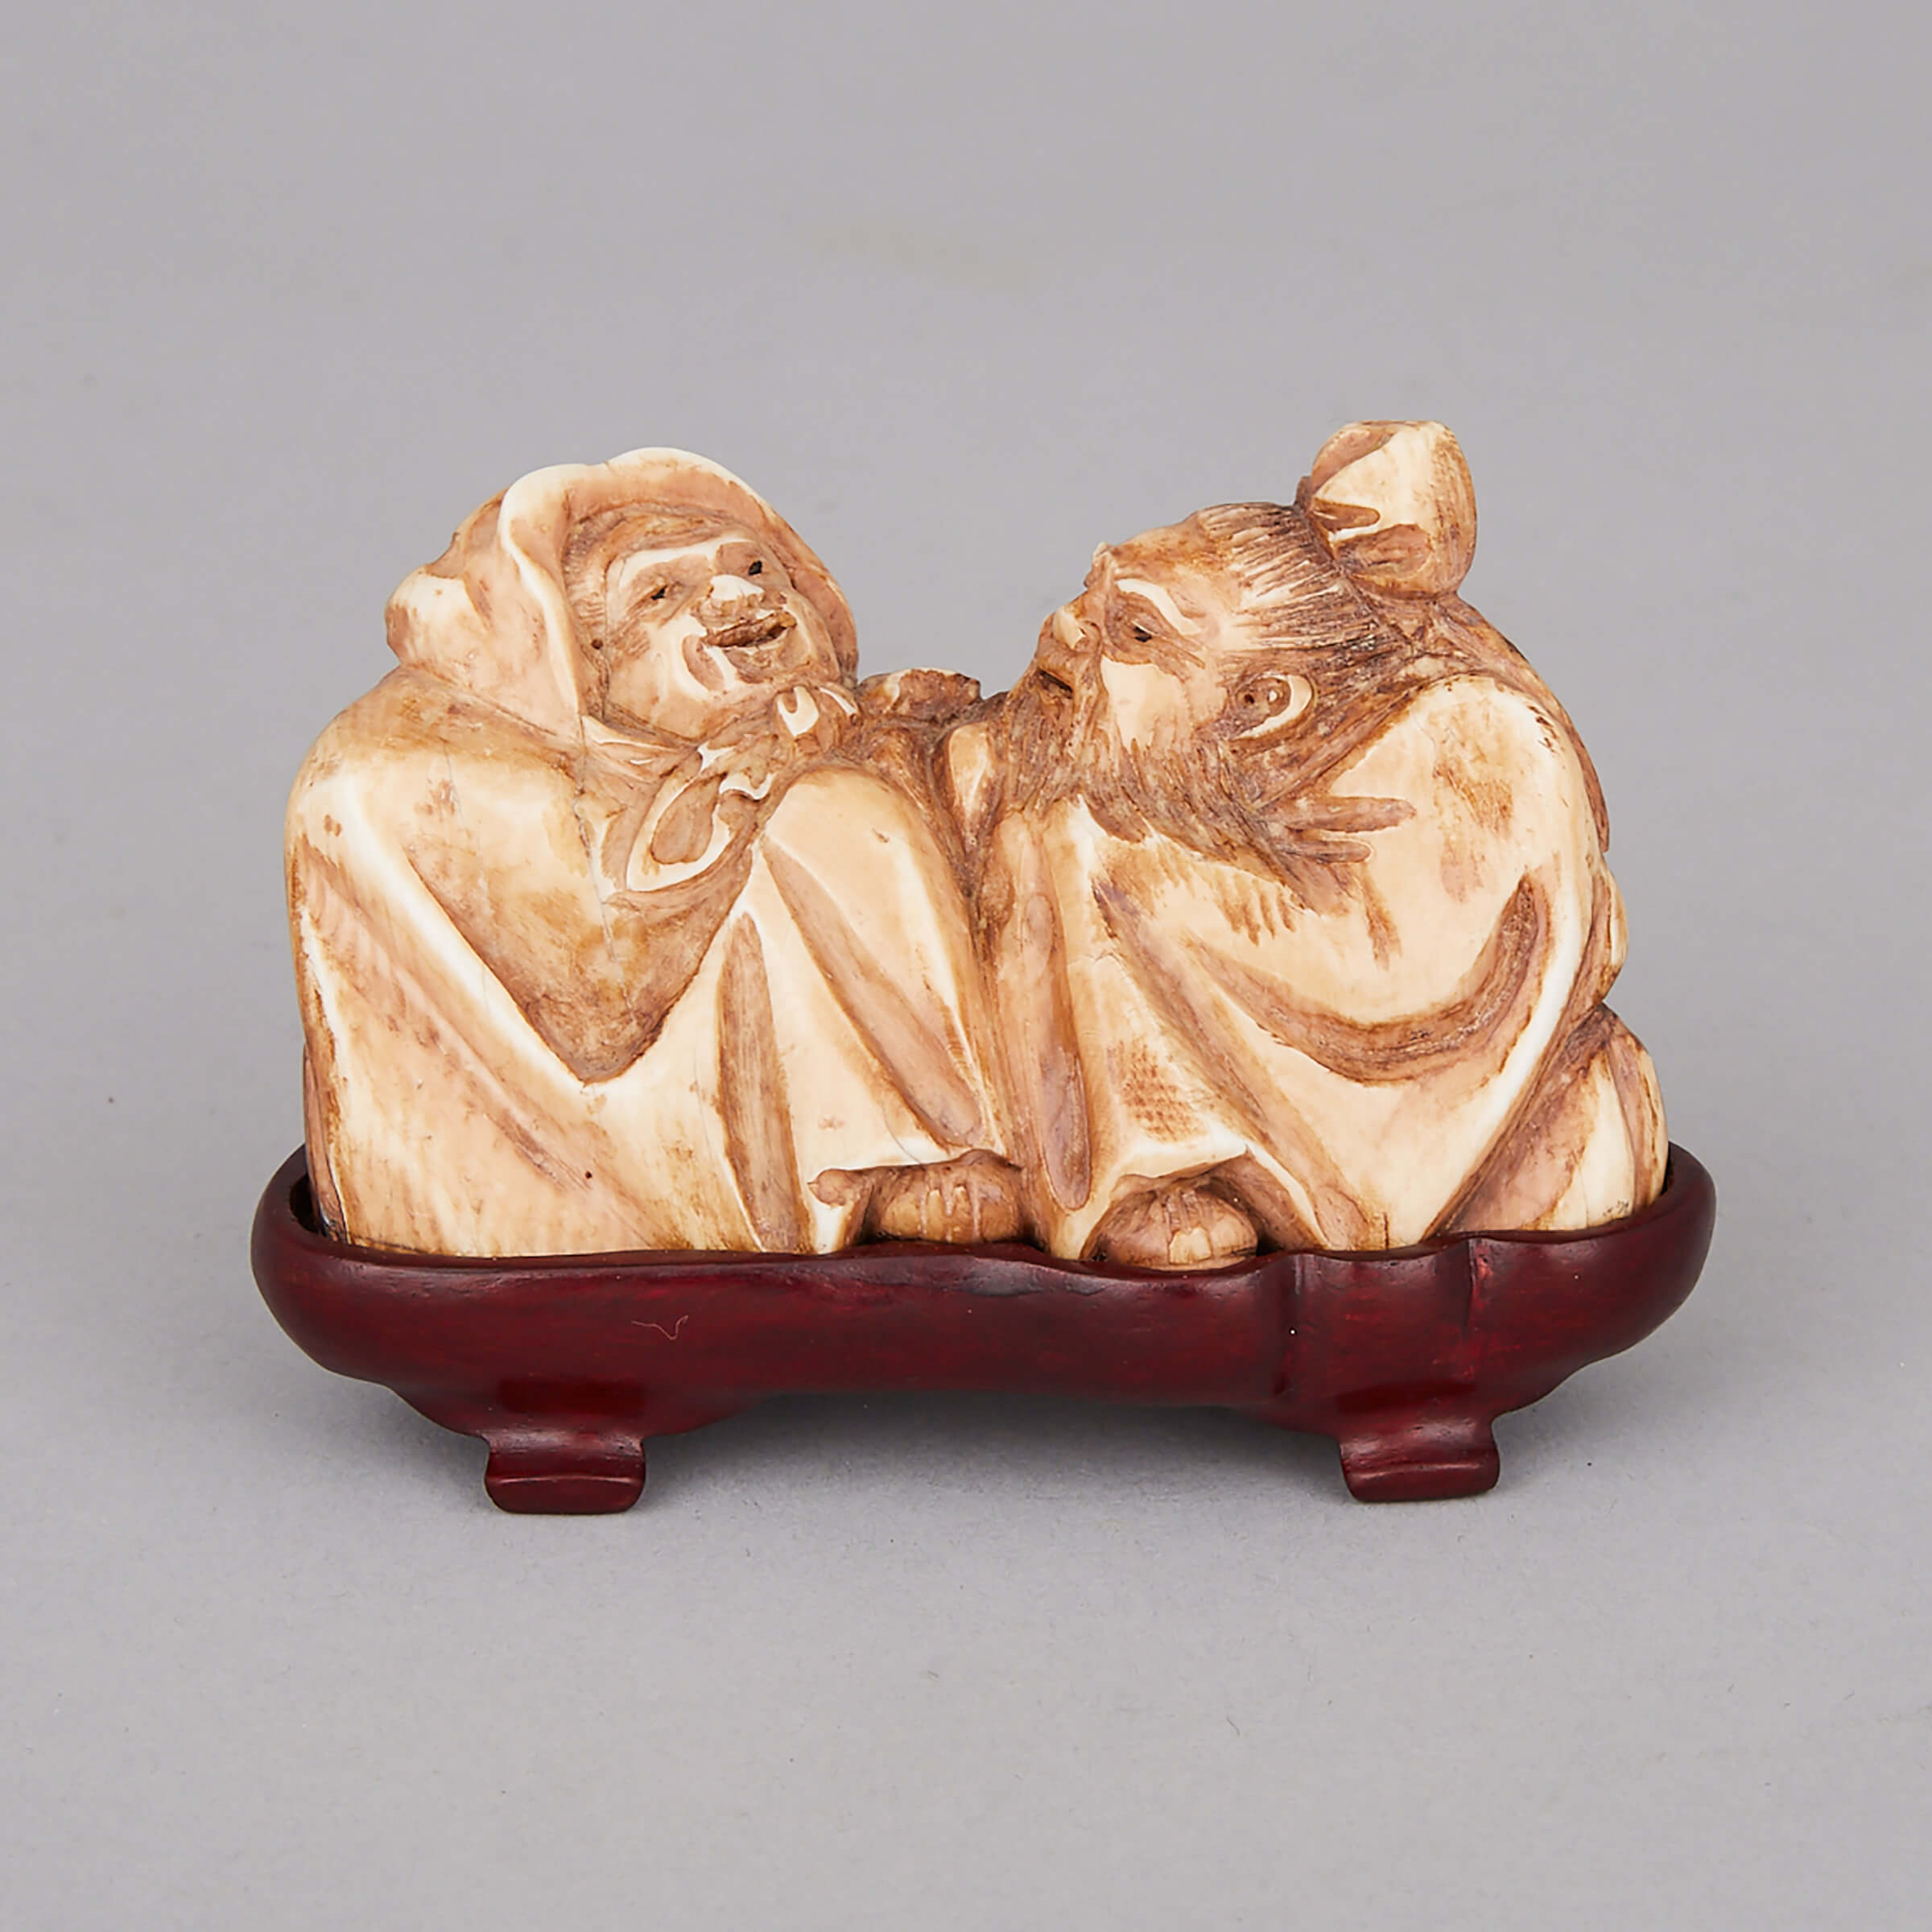 An Ivory Carving of an Old Couple